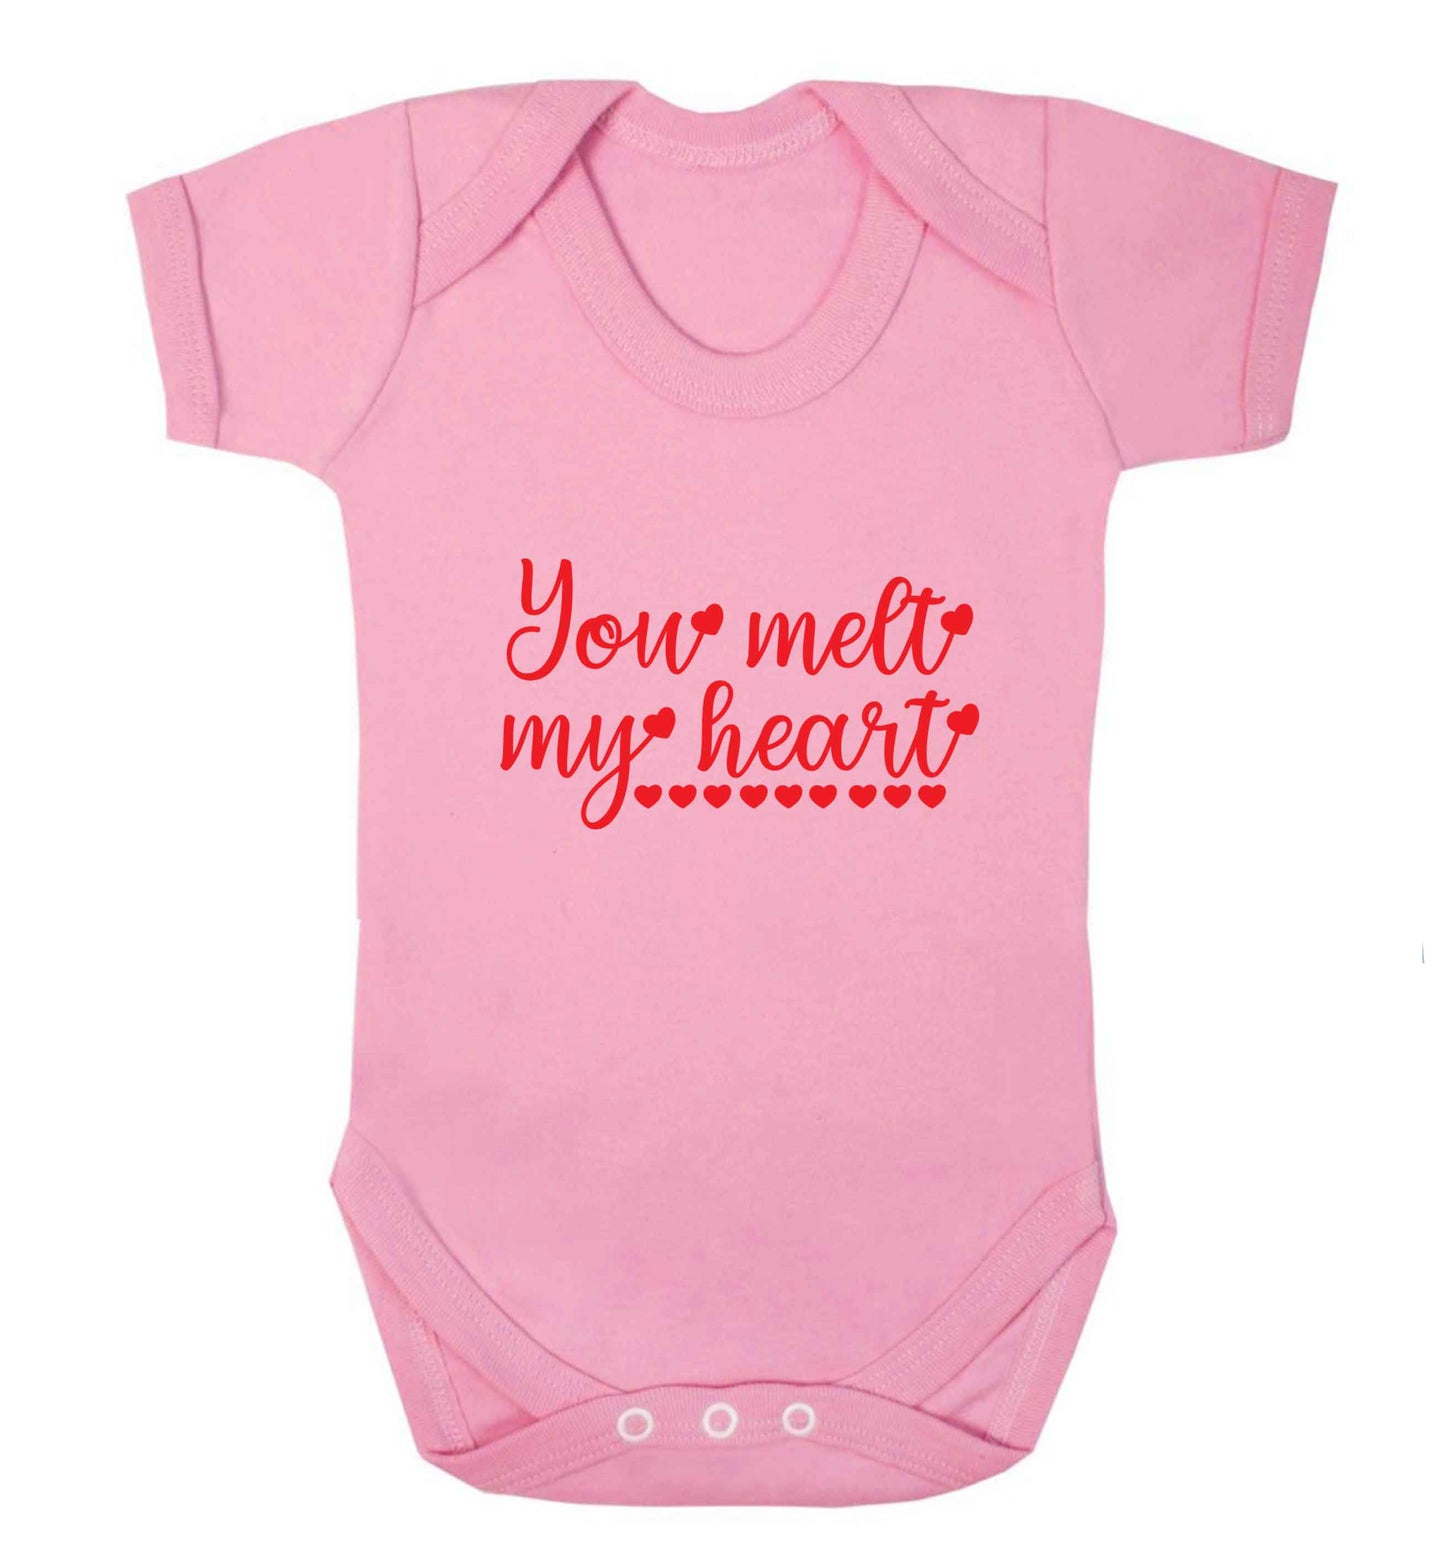 You melt my heart baby vest pale pink 18-24 months